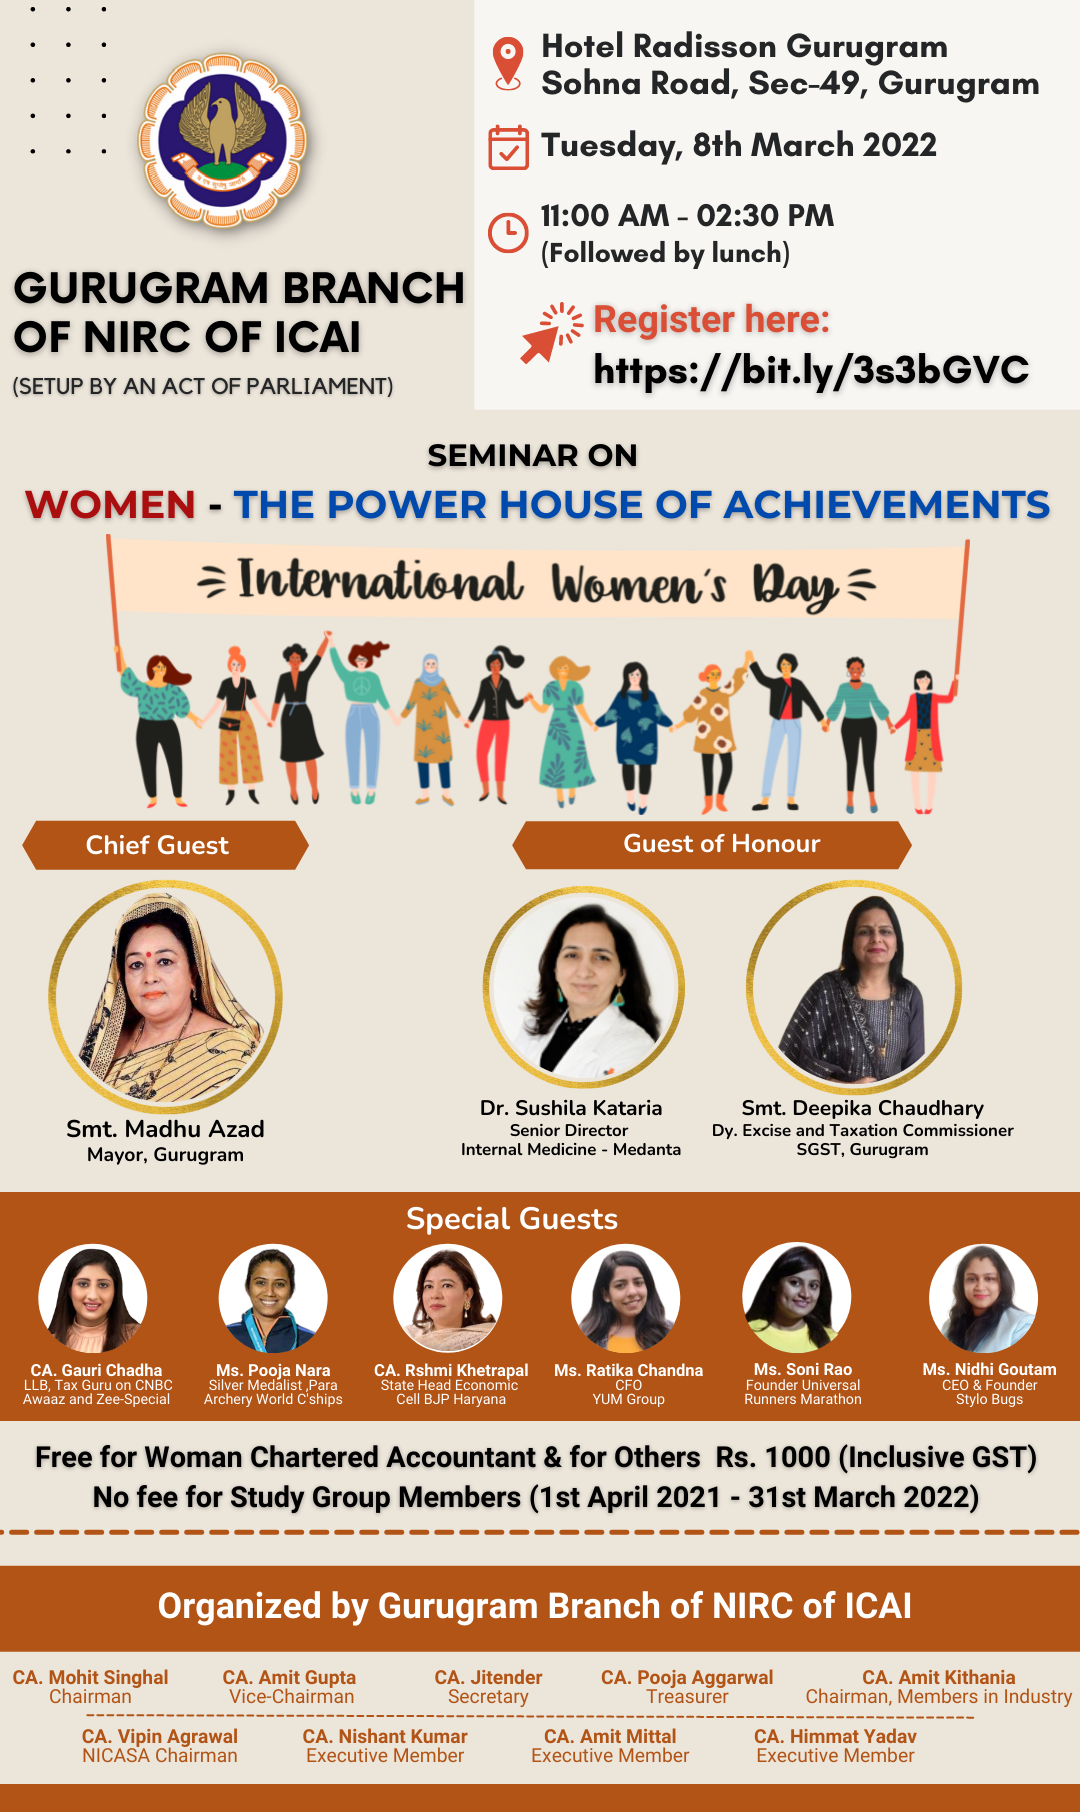 Seminar on Women - The Power House of Achievements